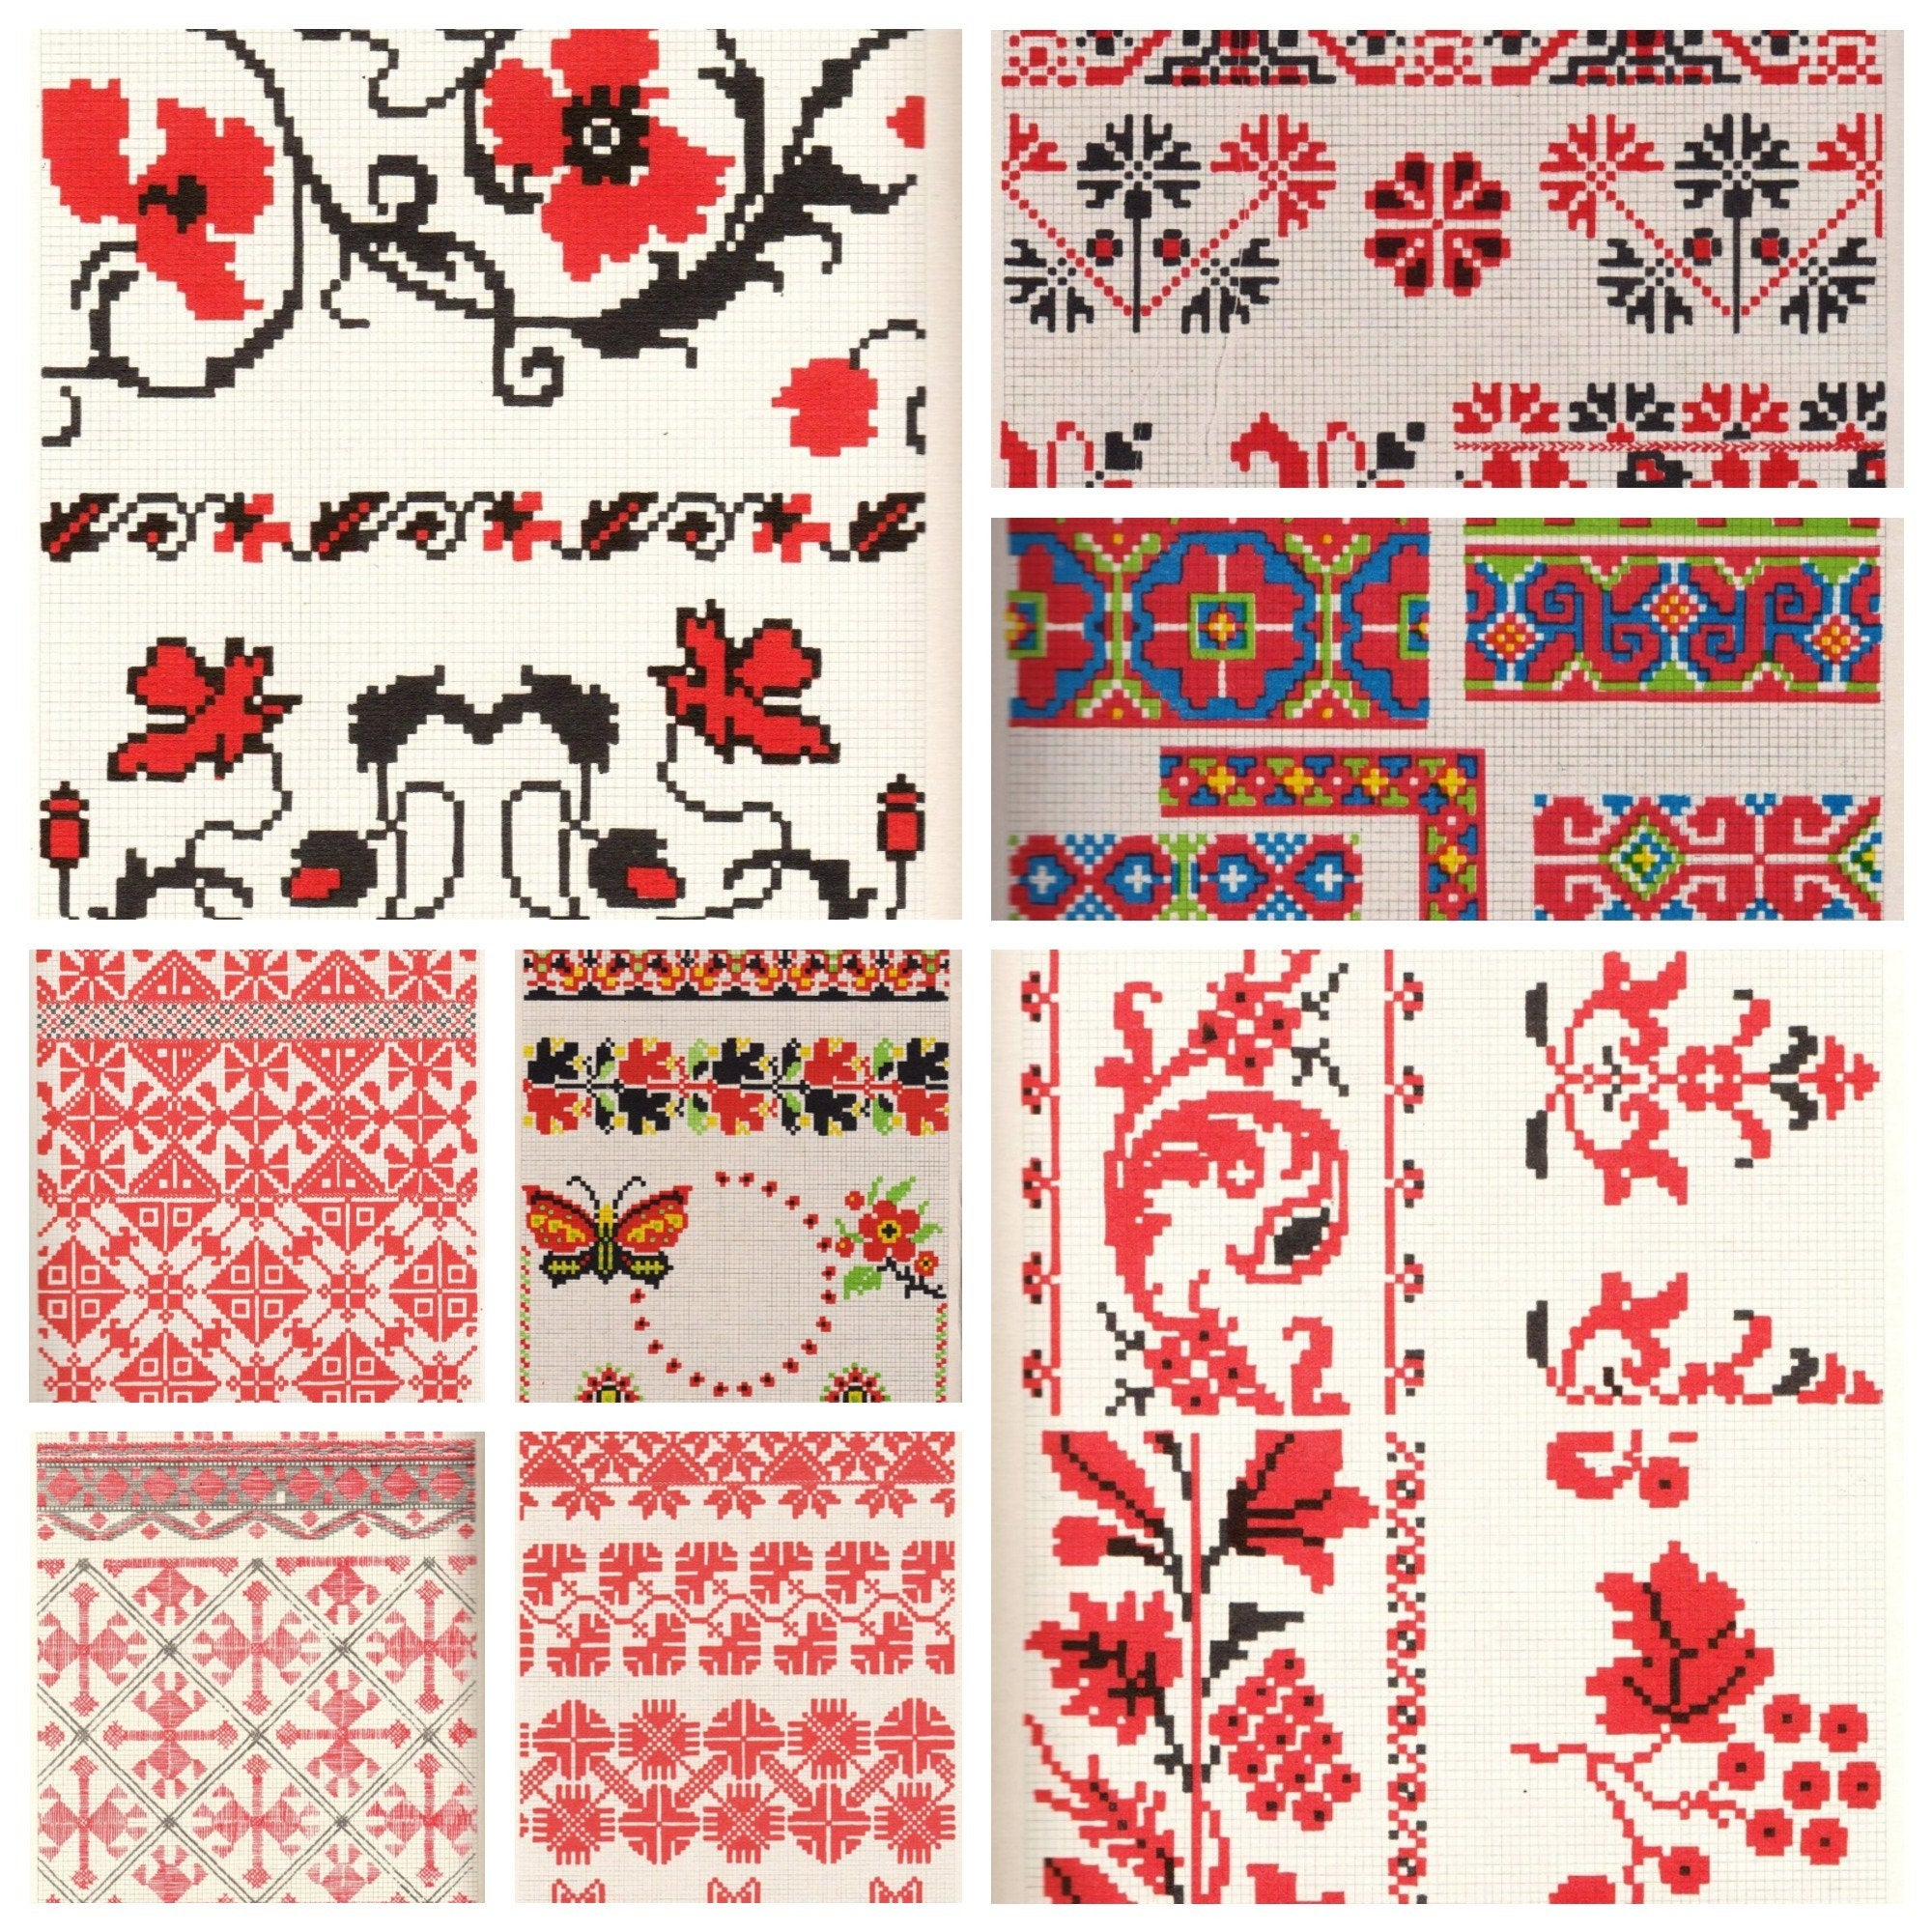 Ukrainian Embroidery Patterns Instant Download 57 Pdf Pages Ukrainian Folk Embroidery Patterns Digital Embroidery Design Diy Boho Chic Cross Stitch Part 1